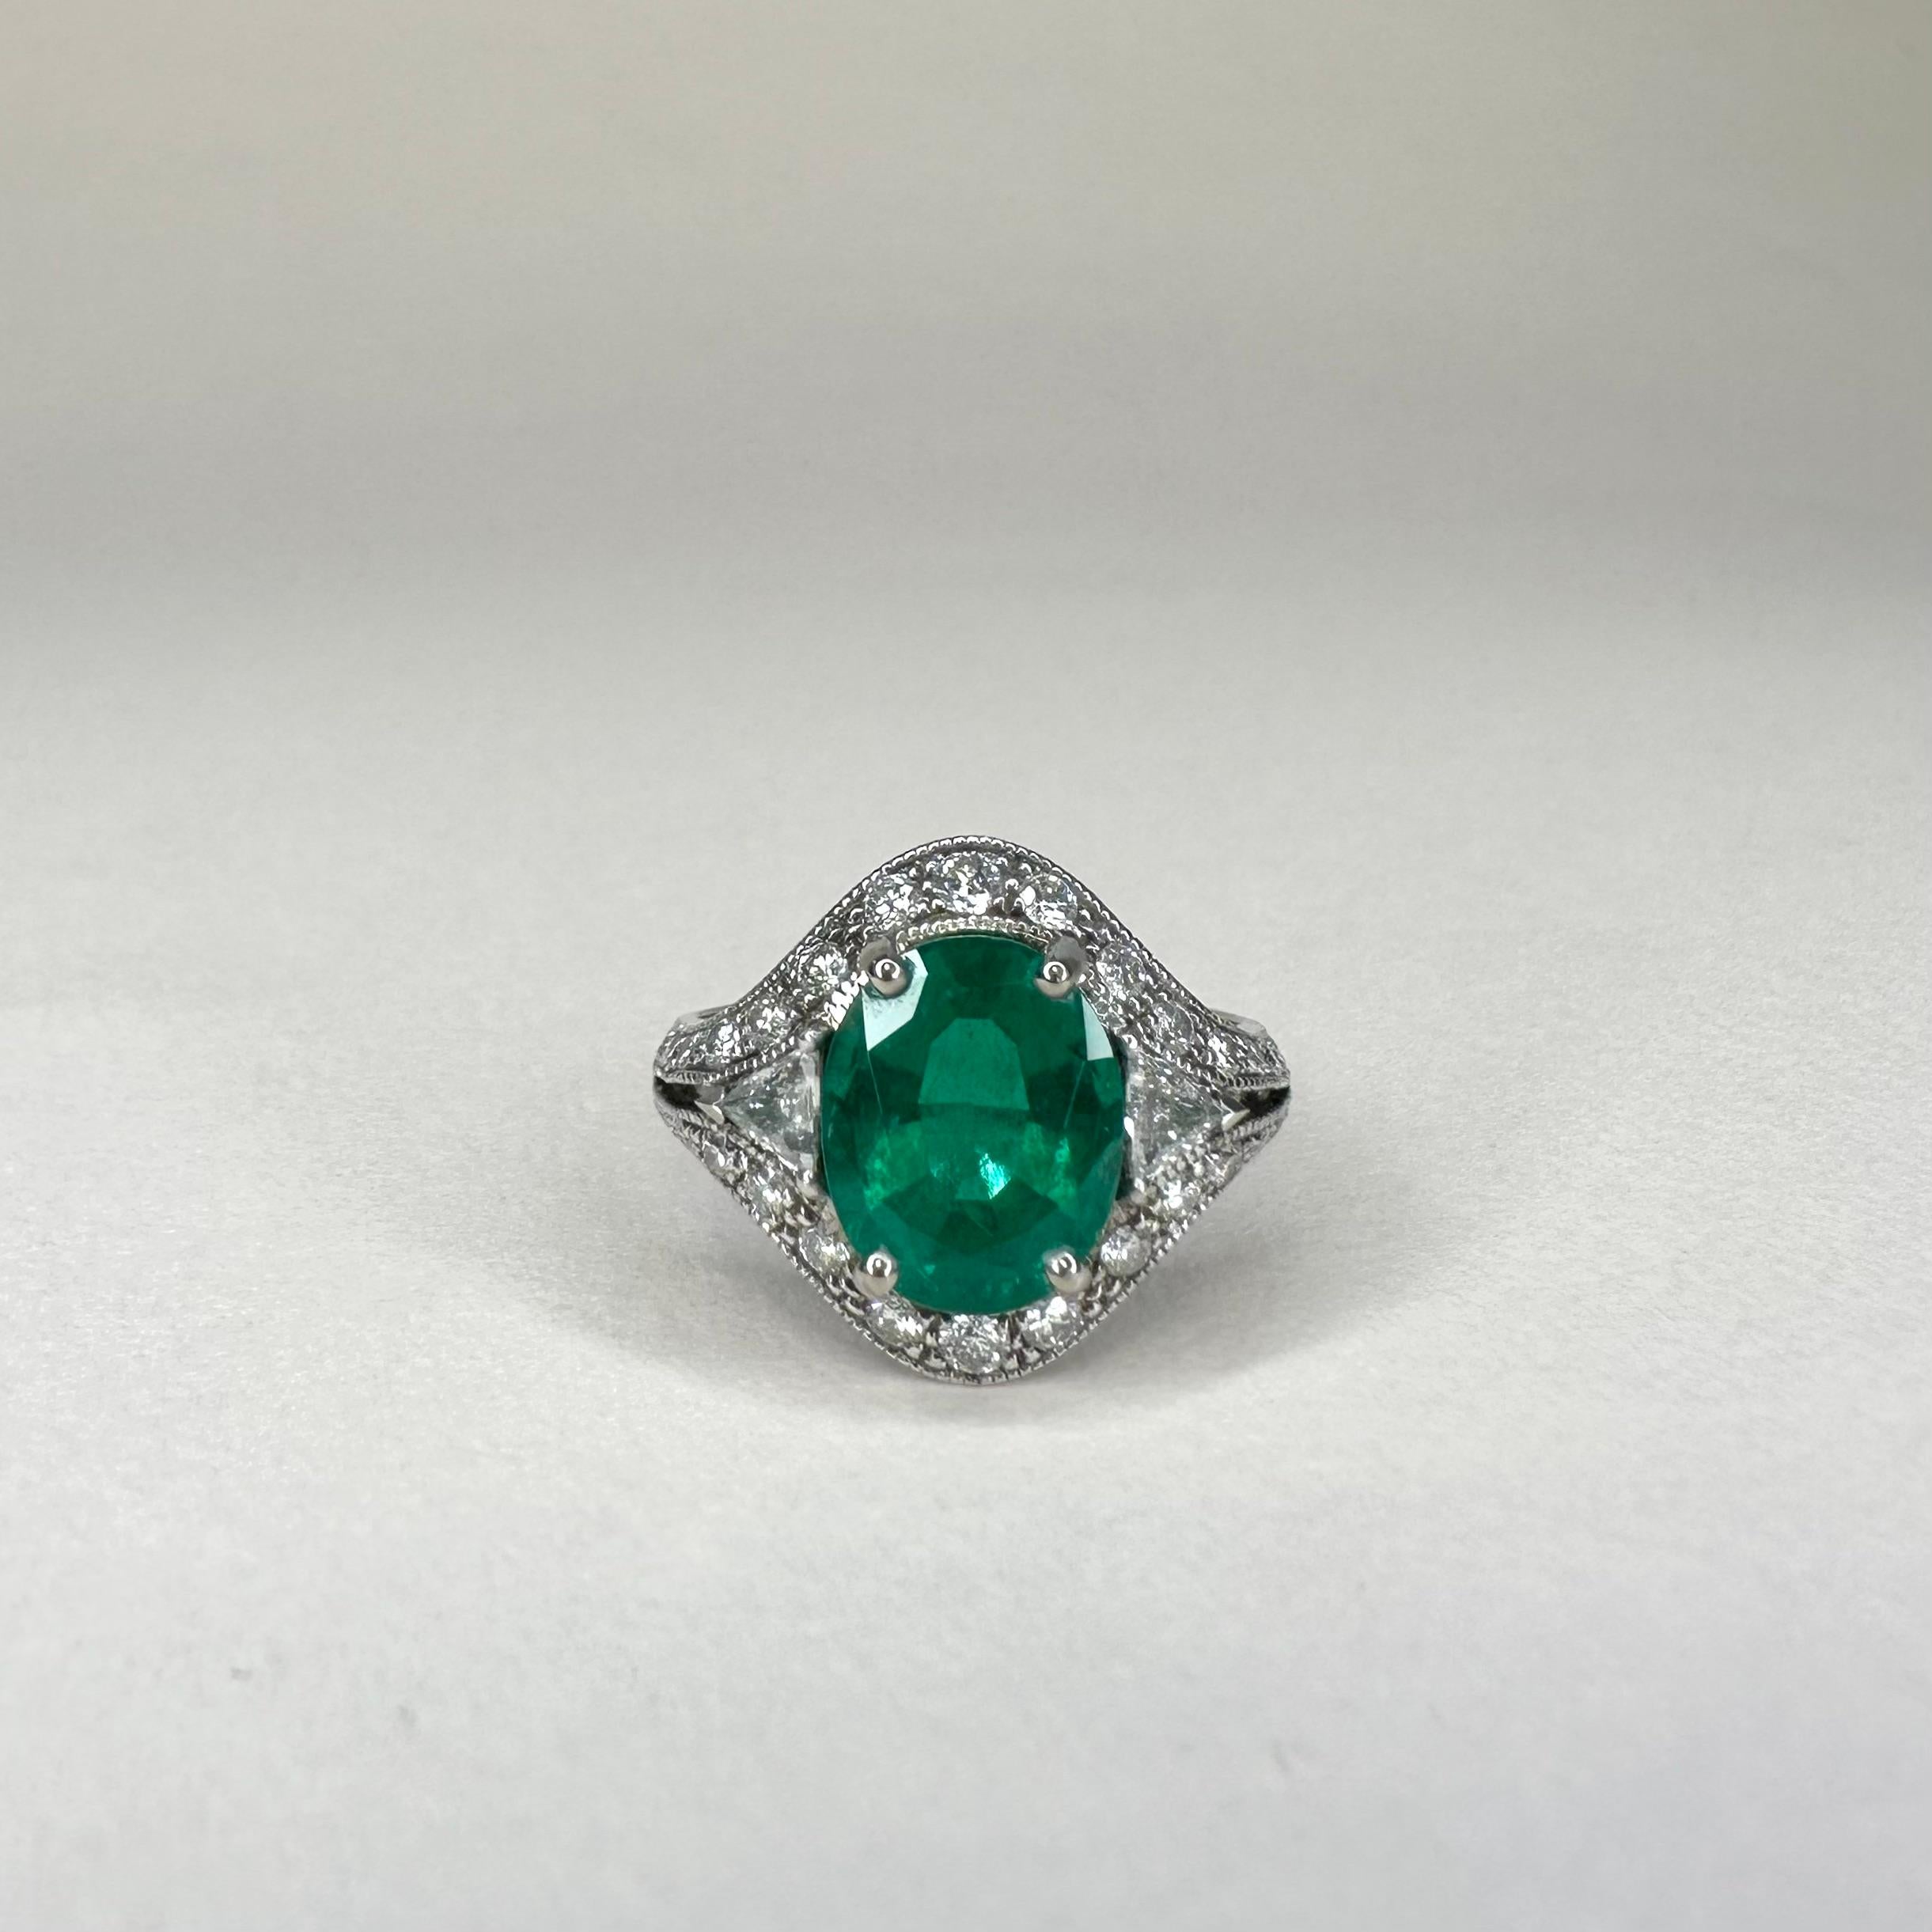 For Sale:  18k White Gold 2.53 Ct Oval Vivid Green Emerald Ring 0.74 Cts of Diamonds 3